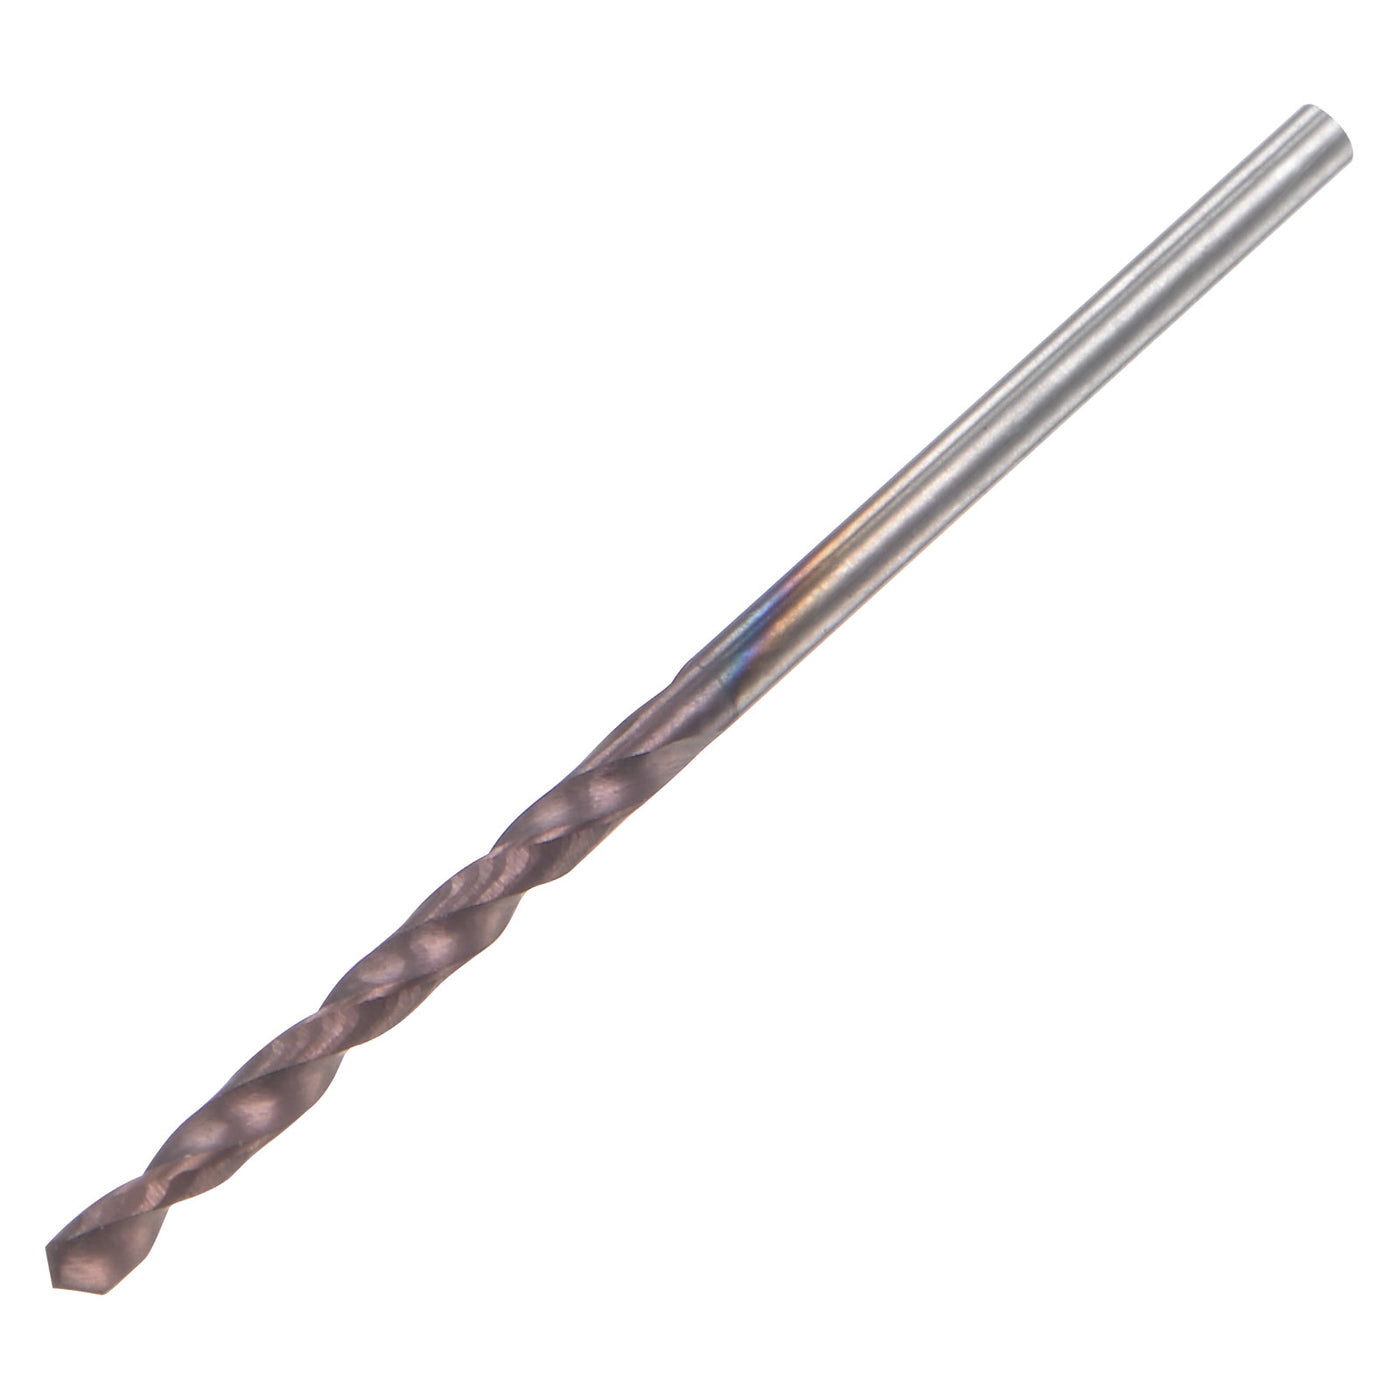 uxcell Uxcell 1.4mm DIN K45 Tungsten Carbide AlTiSin Coated Drill Bit for Stainless Steel